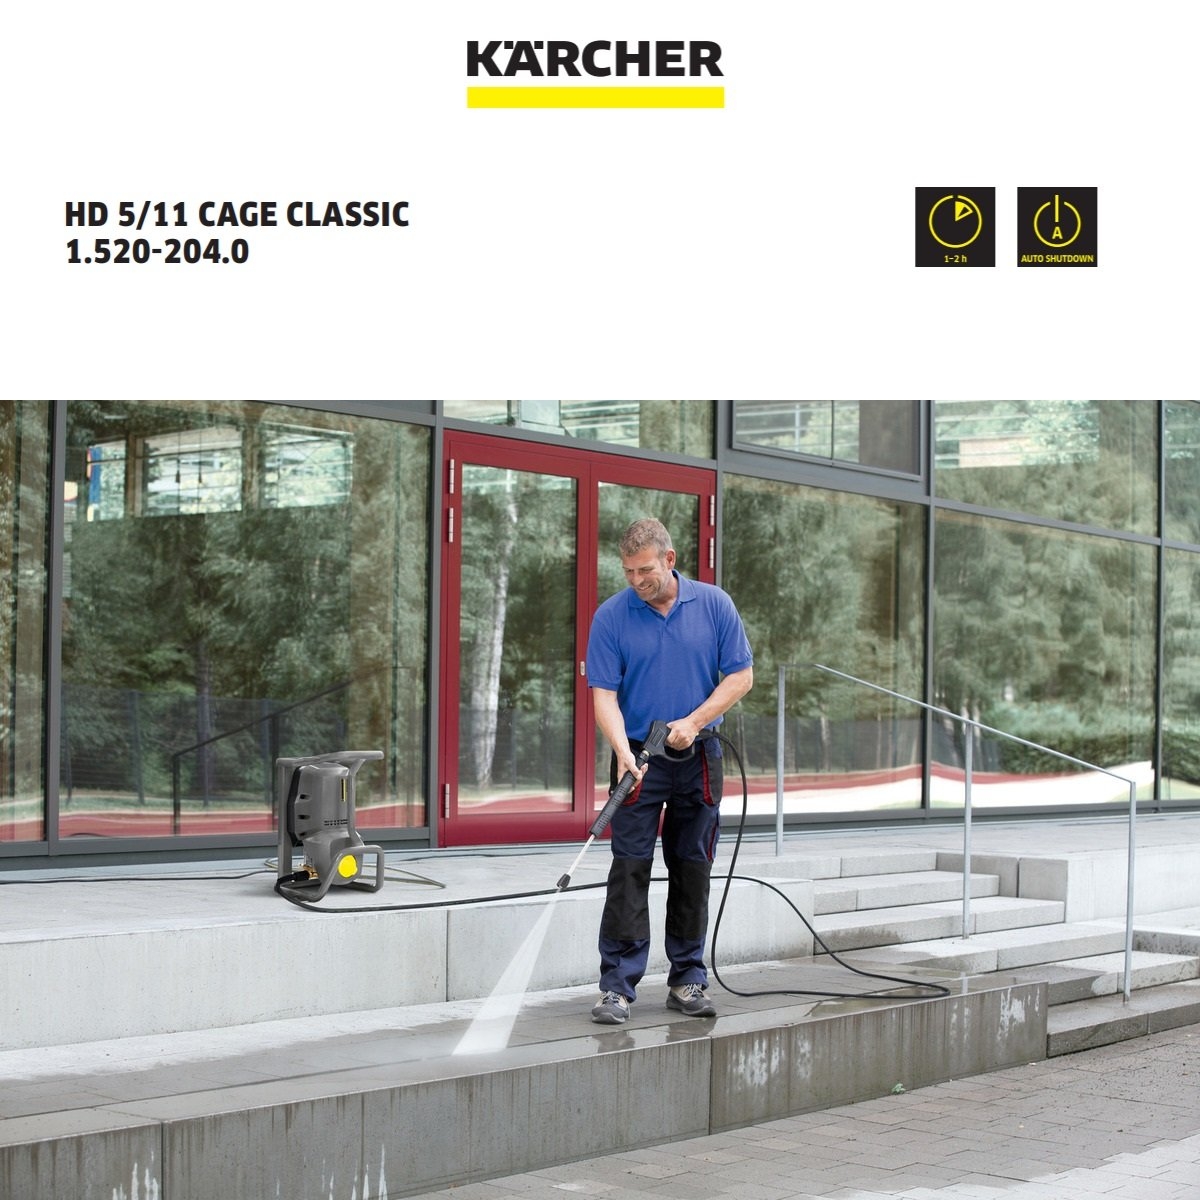 KARCHER HIGH PRESSURE WASHER Professional Classic High-Pressure Cage Professional HD 5/11 Cleaning Karcher Cleaner